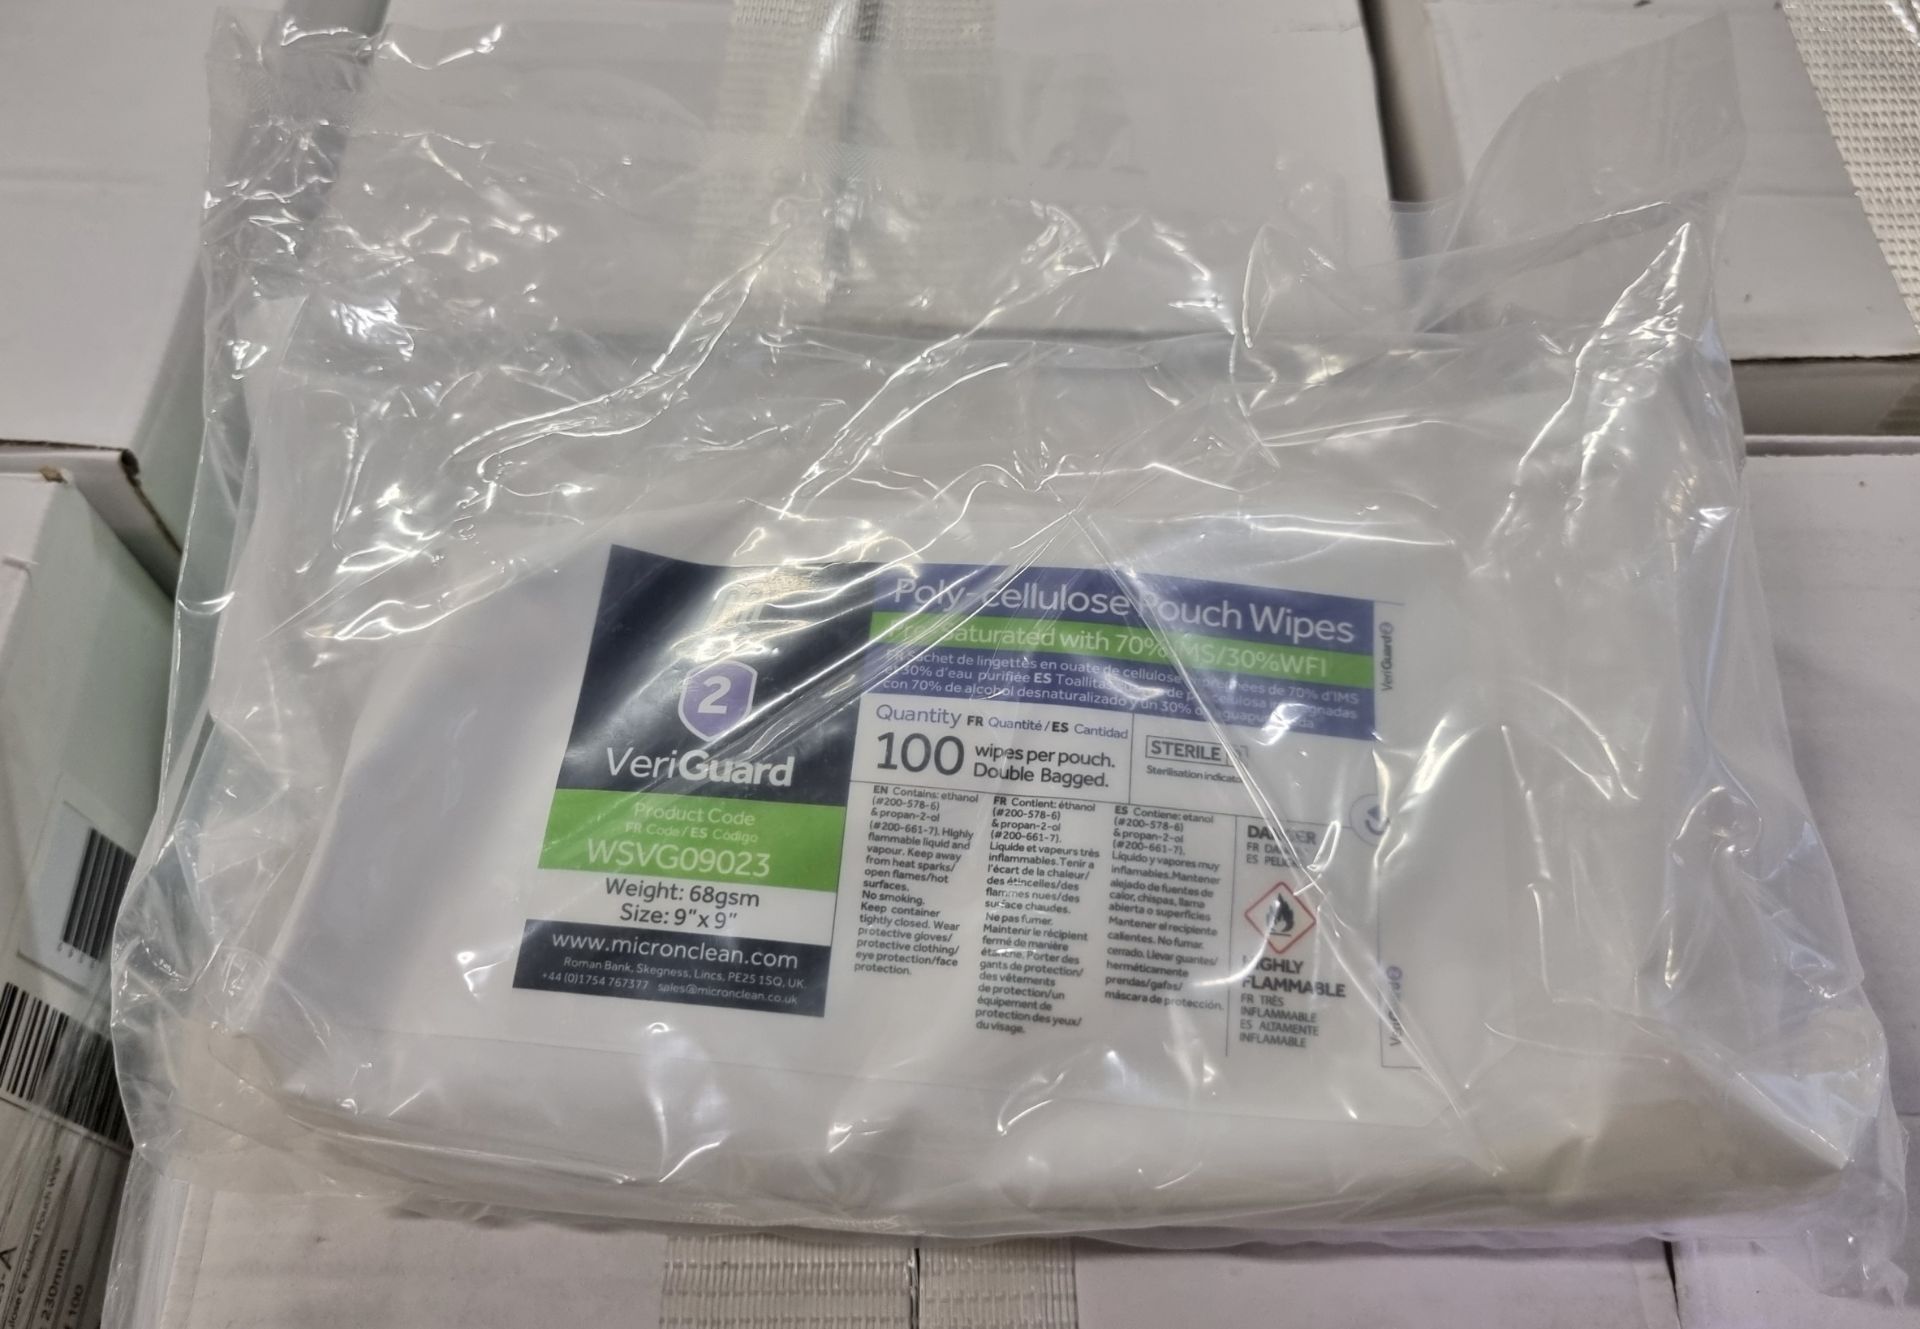 36x boxes of Micronclean Veriguard Polycellulose C-folded pouch wipe sterile - 230mm x 230mm - Image 2 of 4